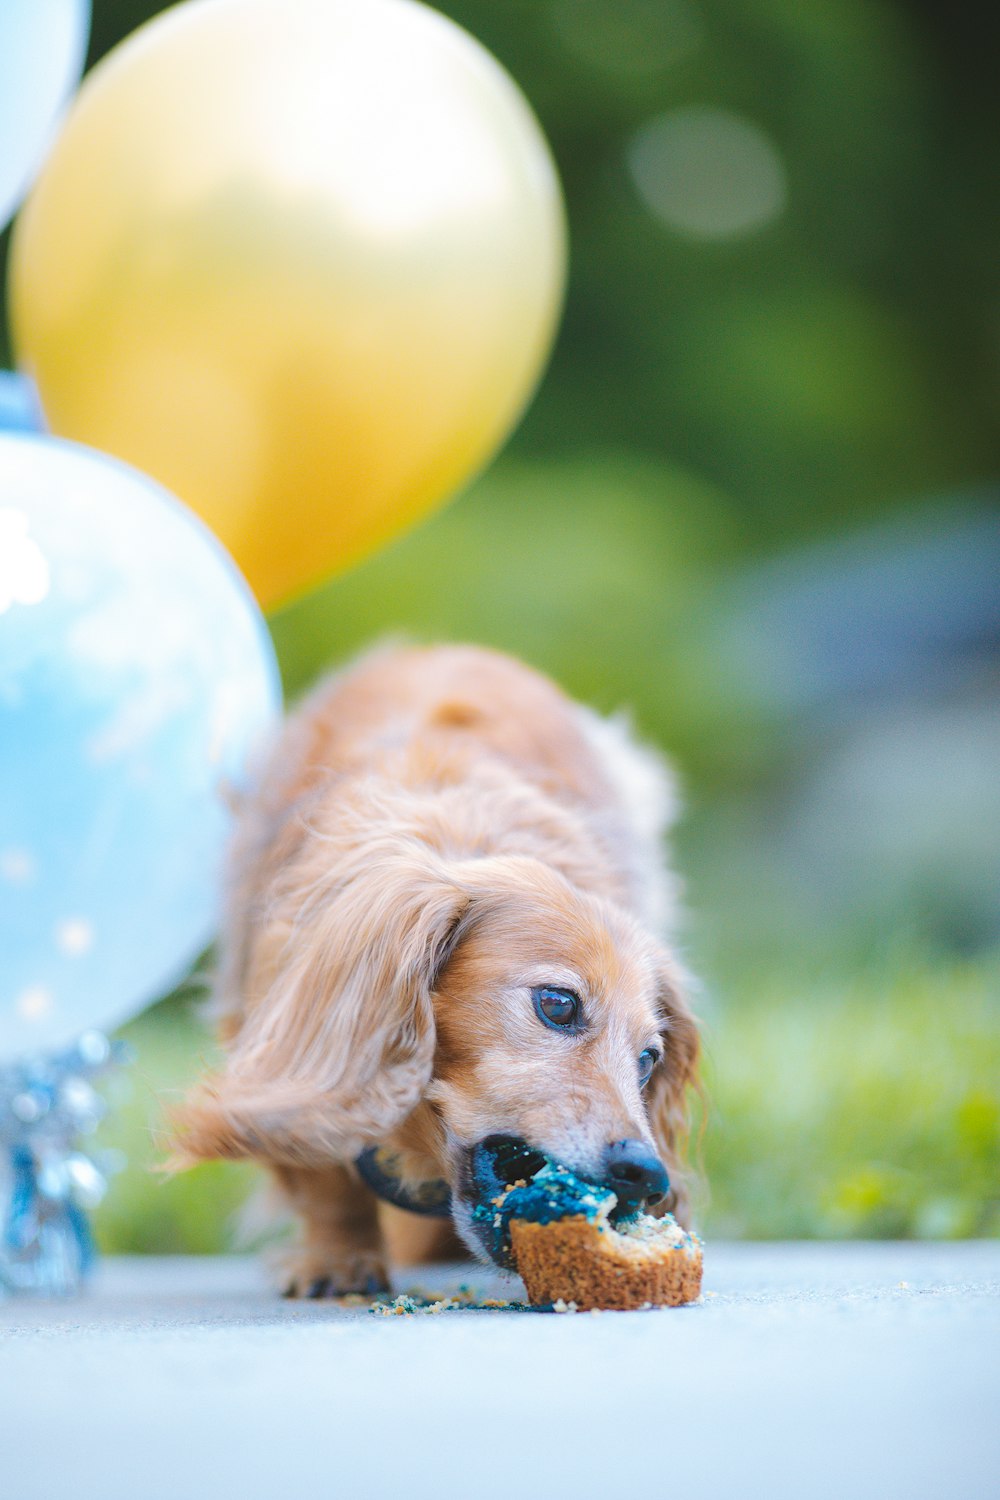 a small dog chewing on a toy in front of balloons